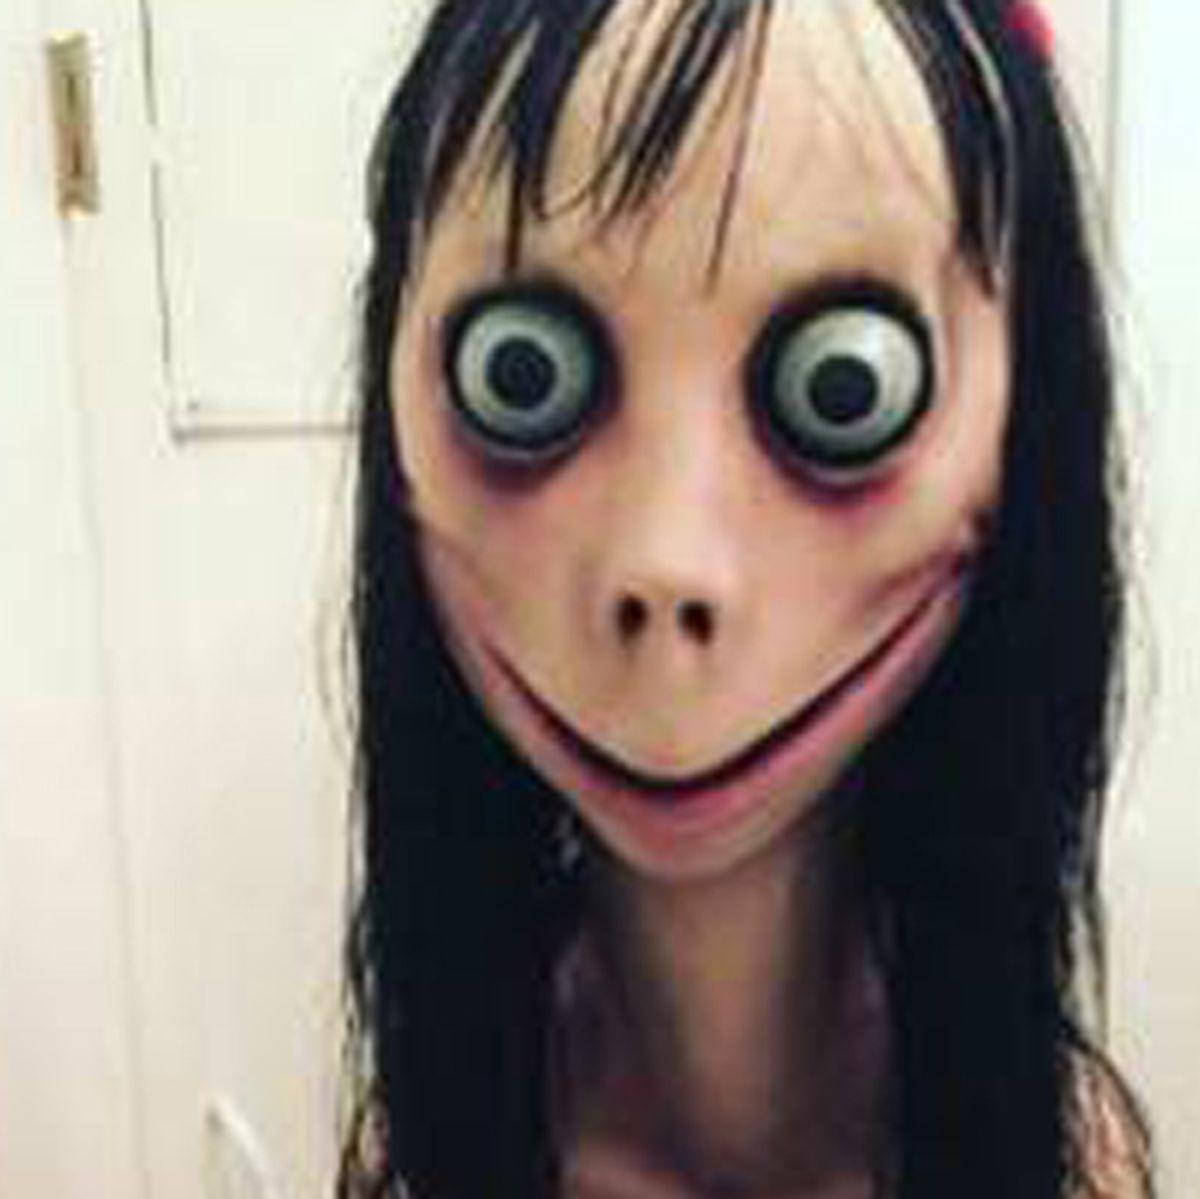 Momo Game Children Targeted By Terrifying Image In Peppa Pig And